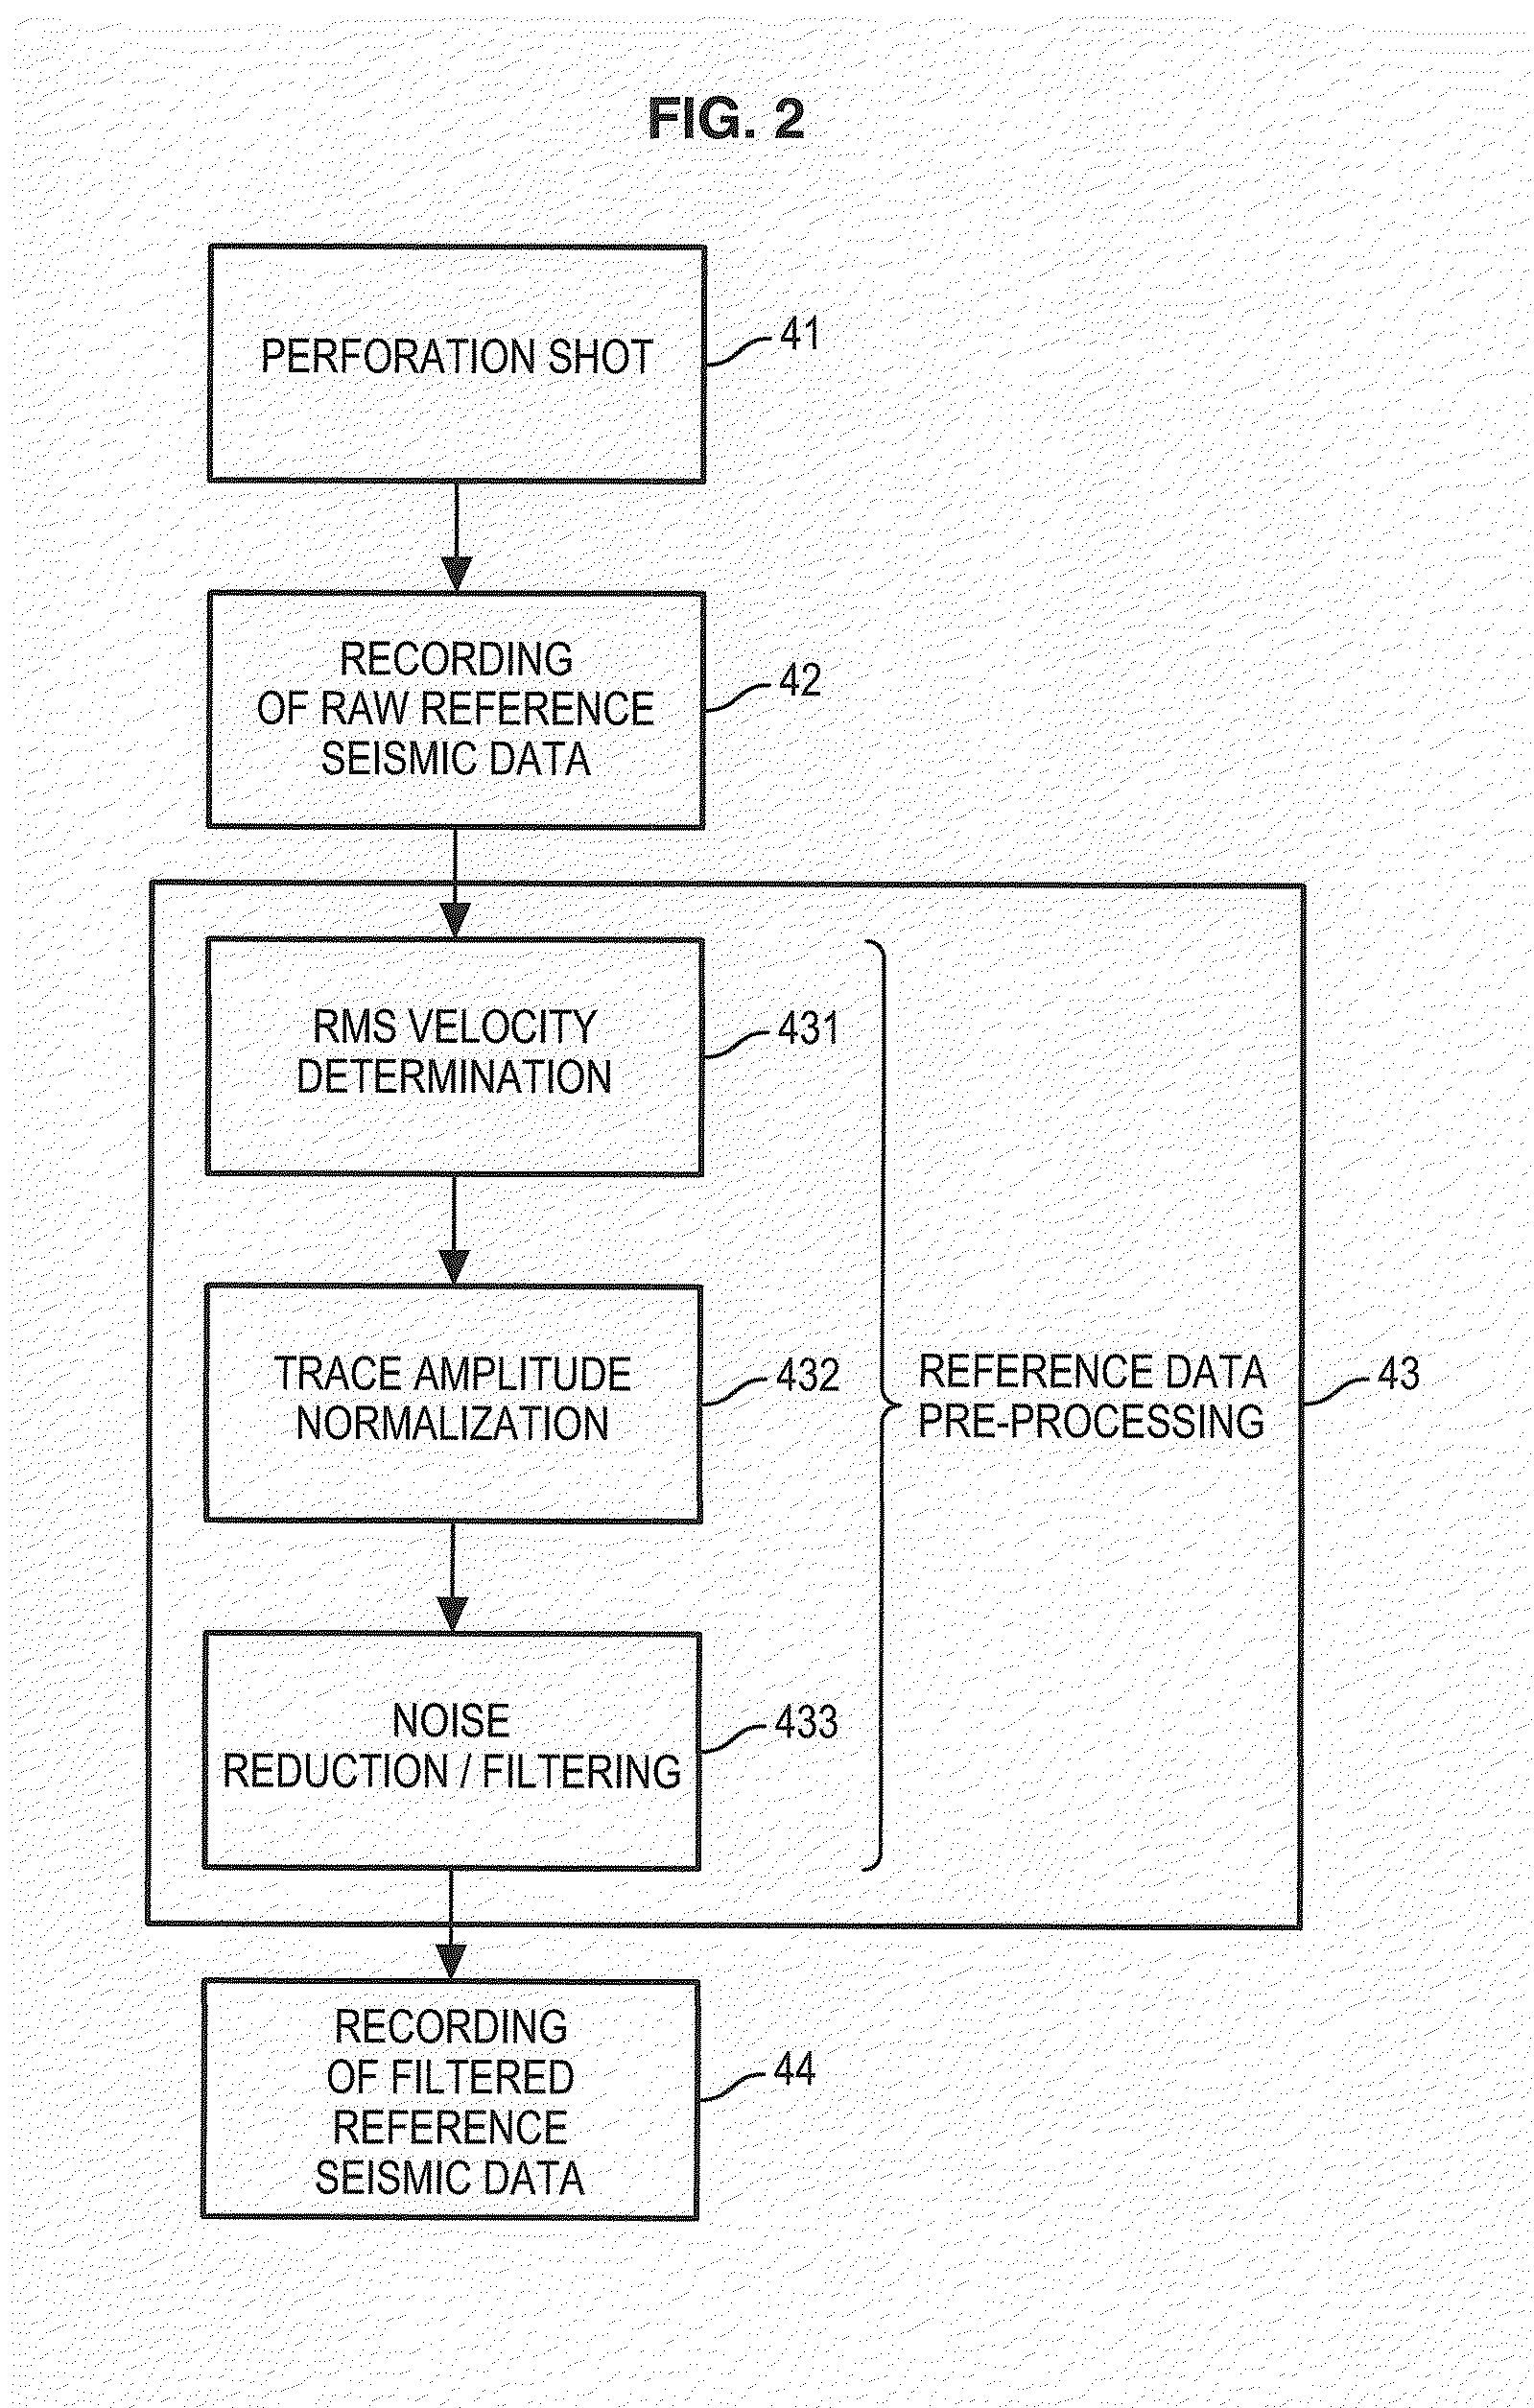 Method for monitoring a subsoil zone, particularly during simulated fracturing operations